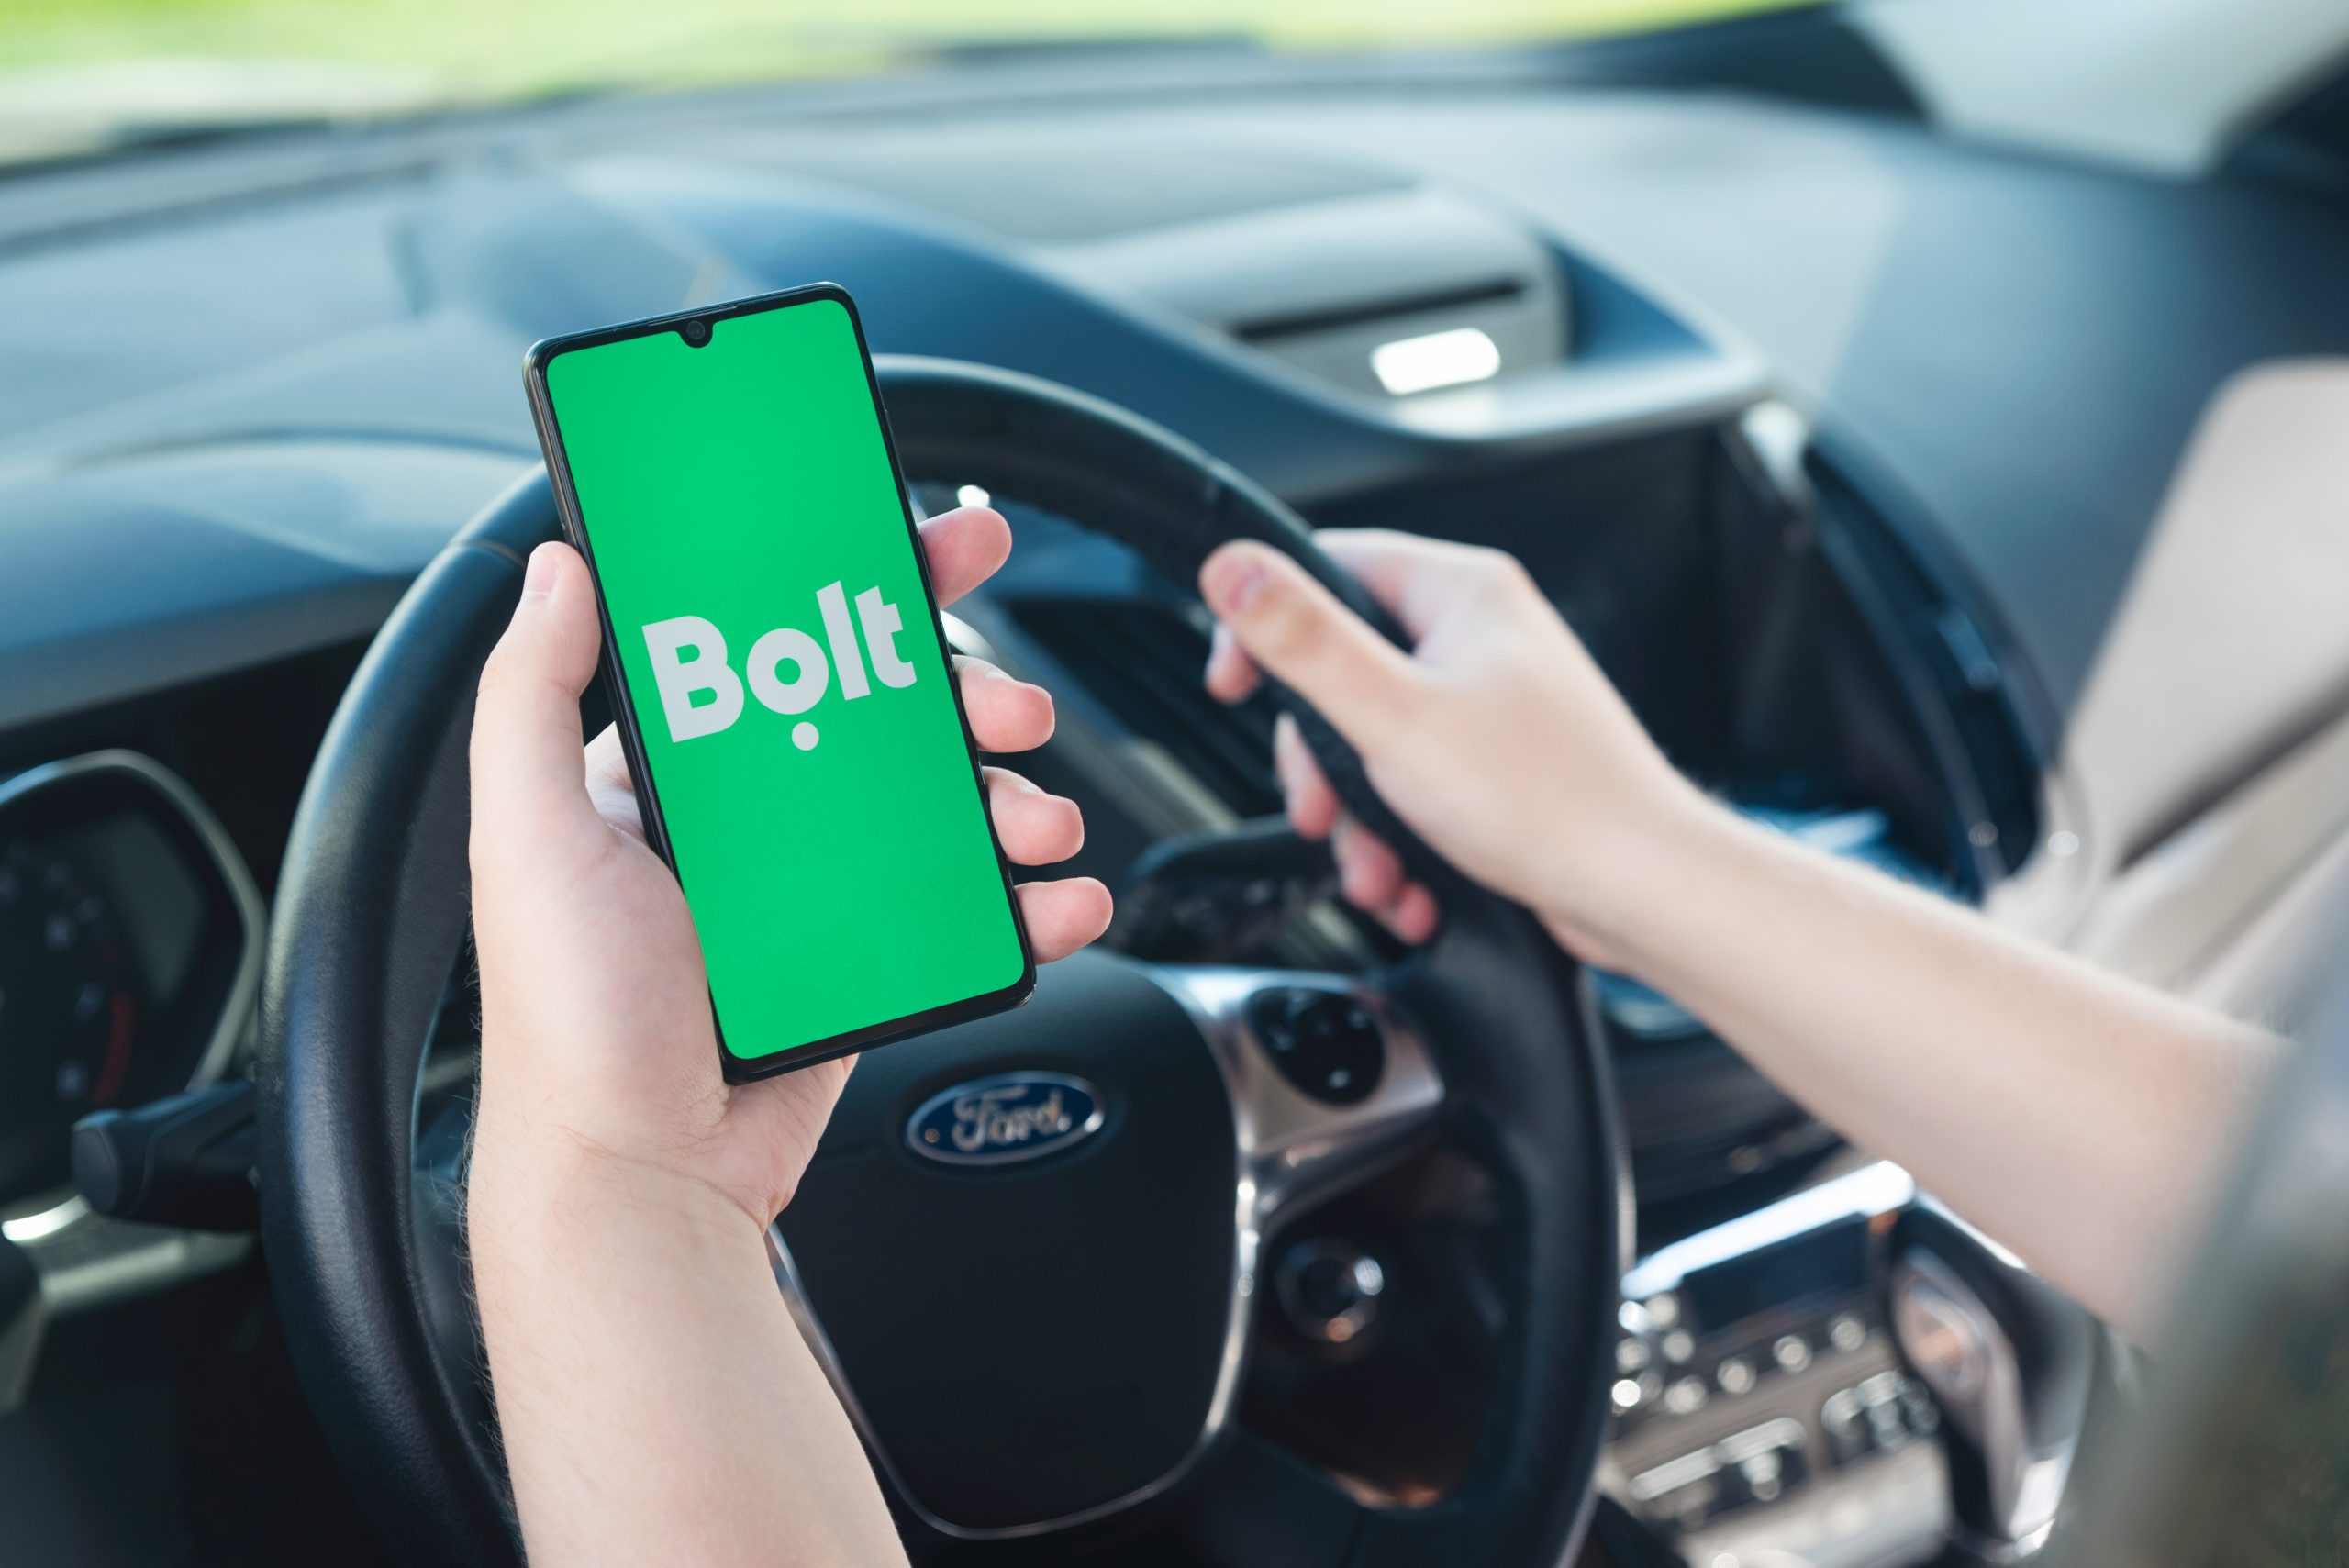 Bolt driver holding smartphone in car